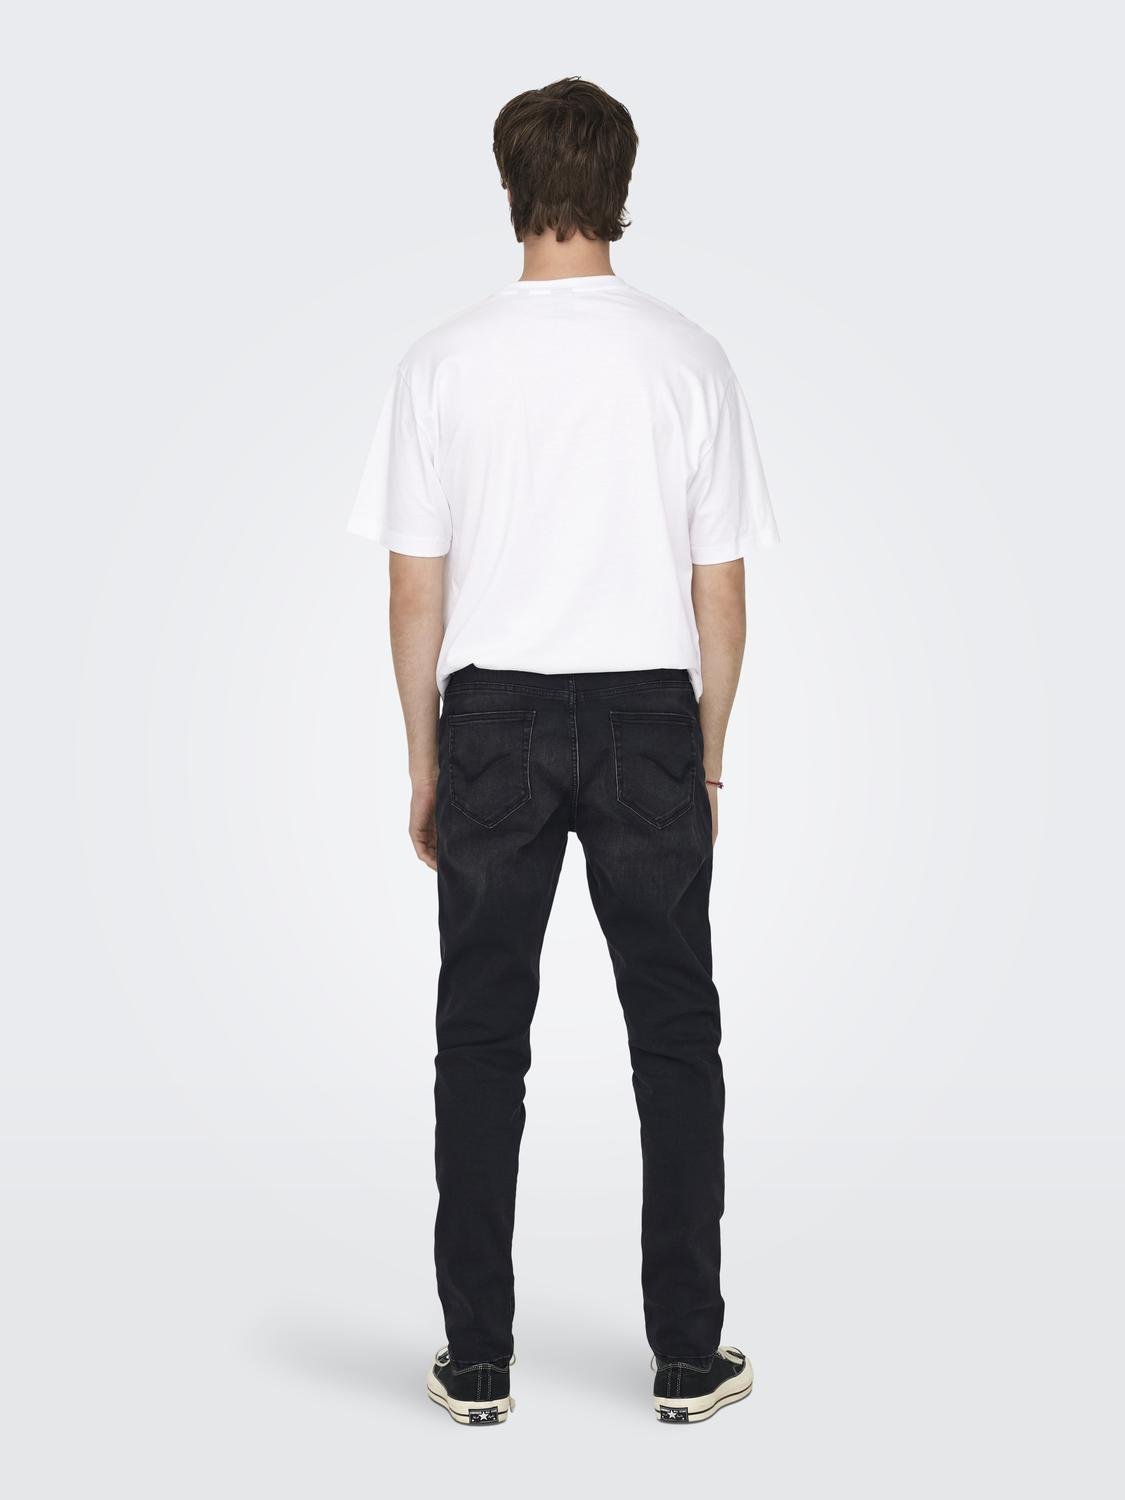 ONLY & SONS Tapered Fit Mid waist Jeans -Black Denim - 22027844